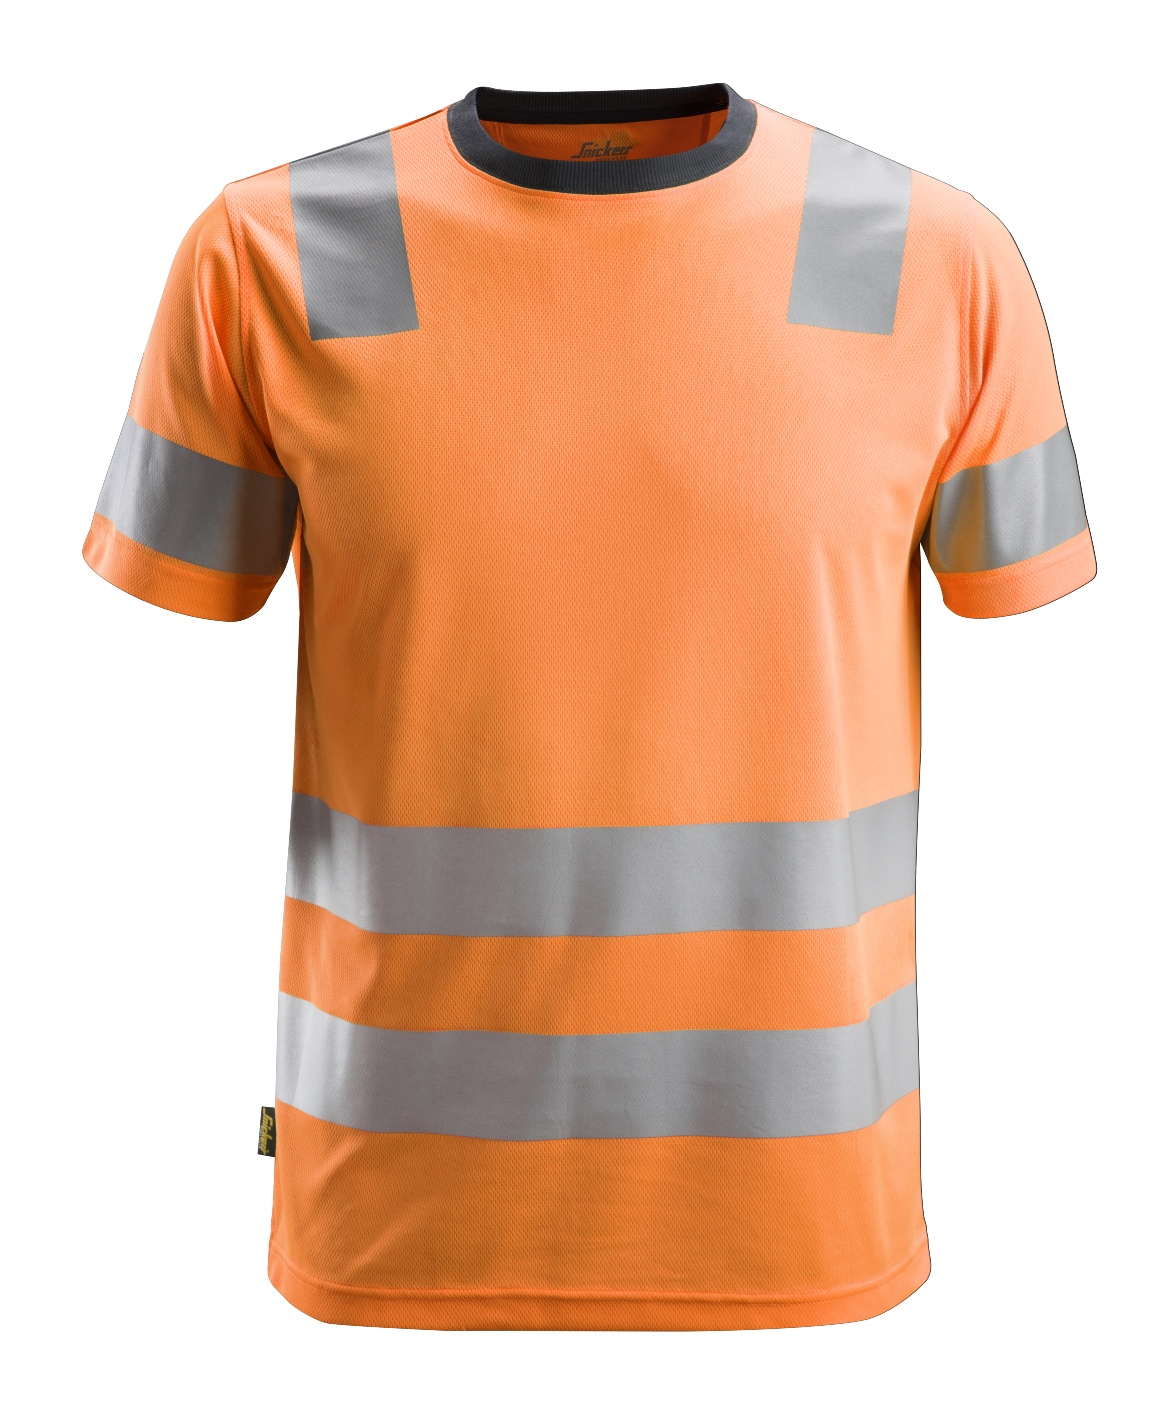 Snickers 2530 - T-shirt HV, AllroundWork CL2